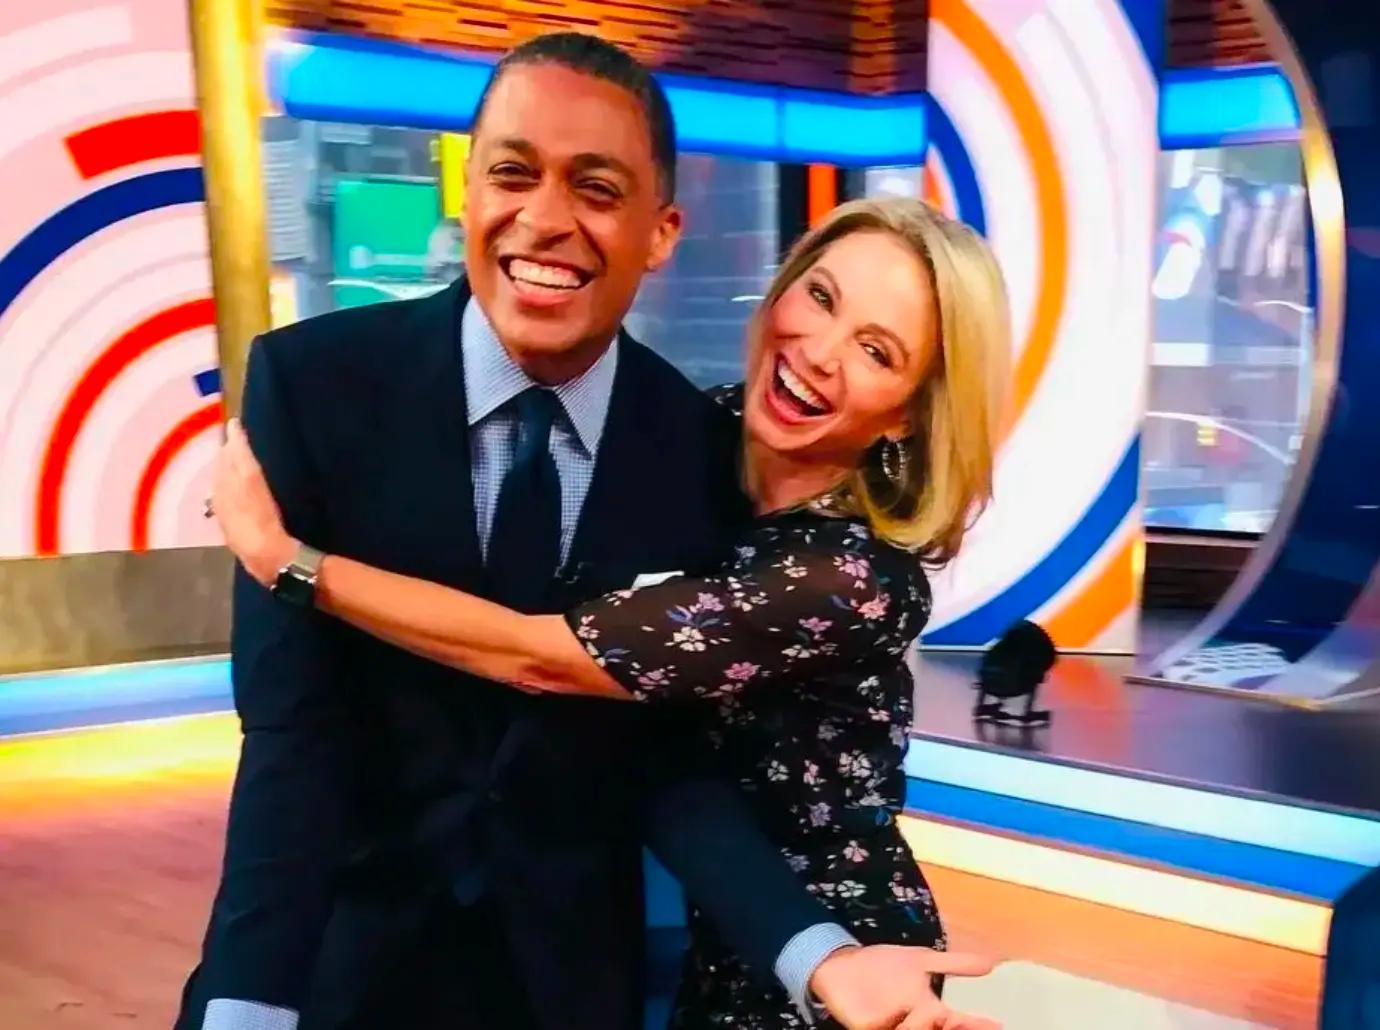 Amy Robach and T.J. Holmes Hold Hands During Bar-Hopping Date Night